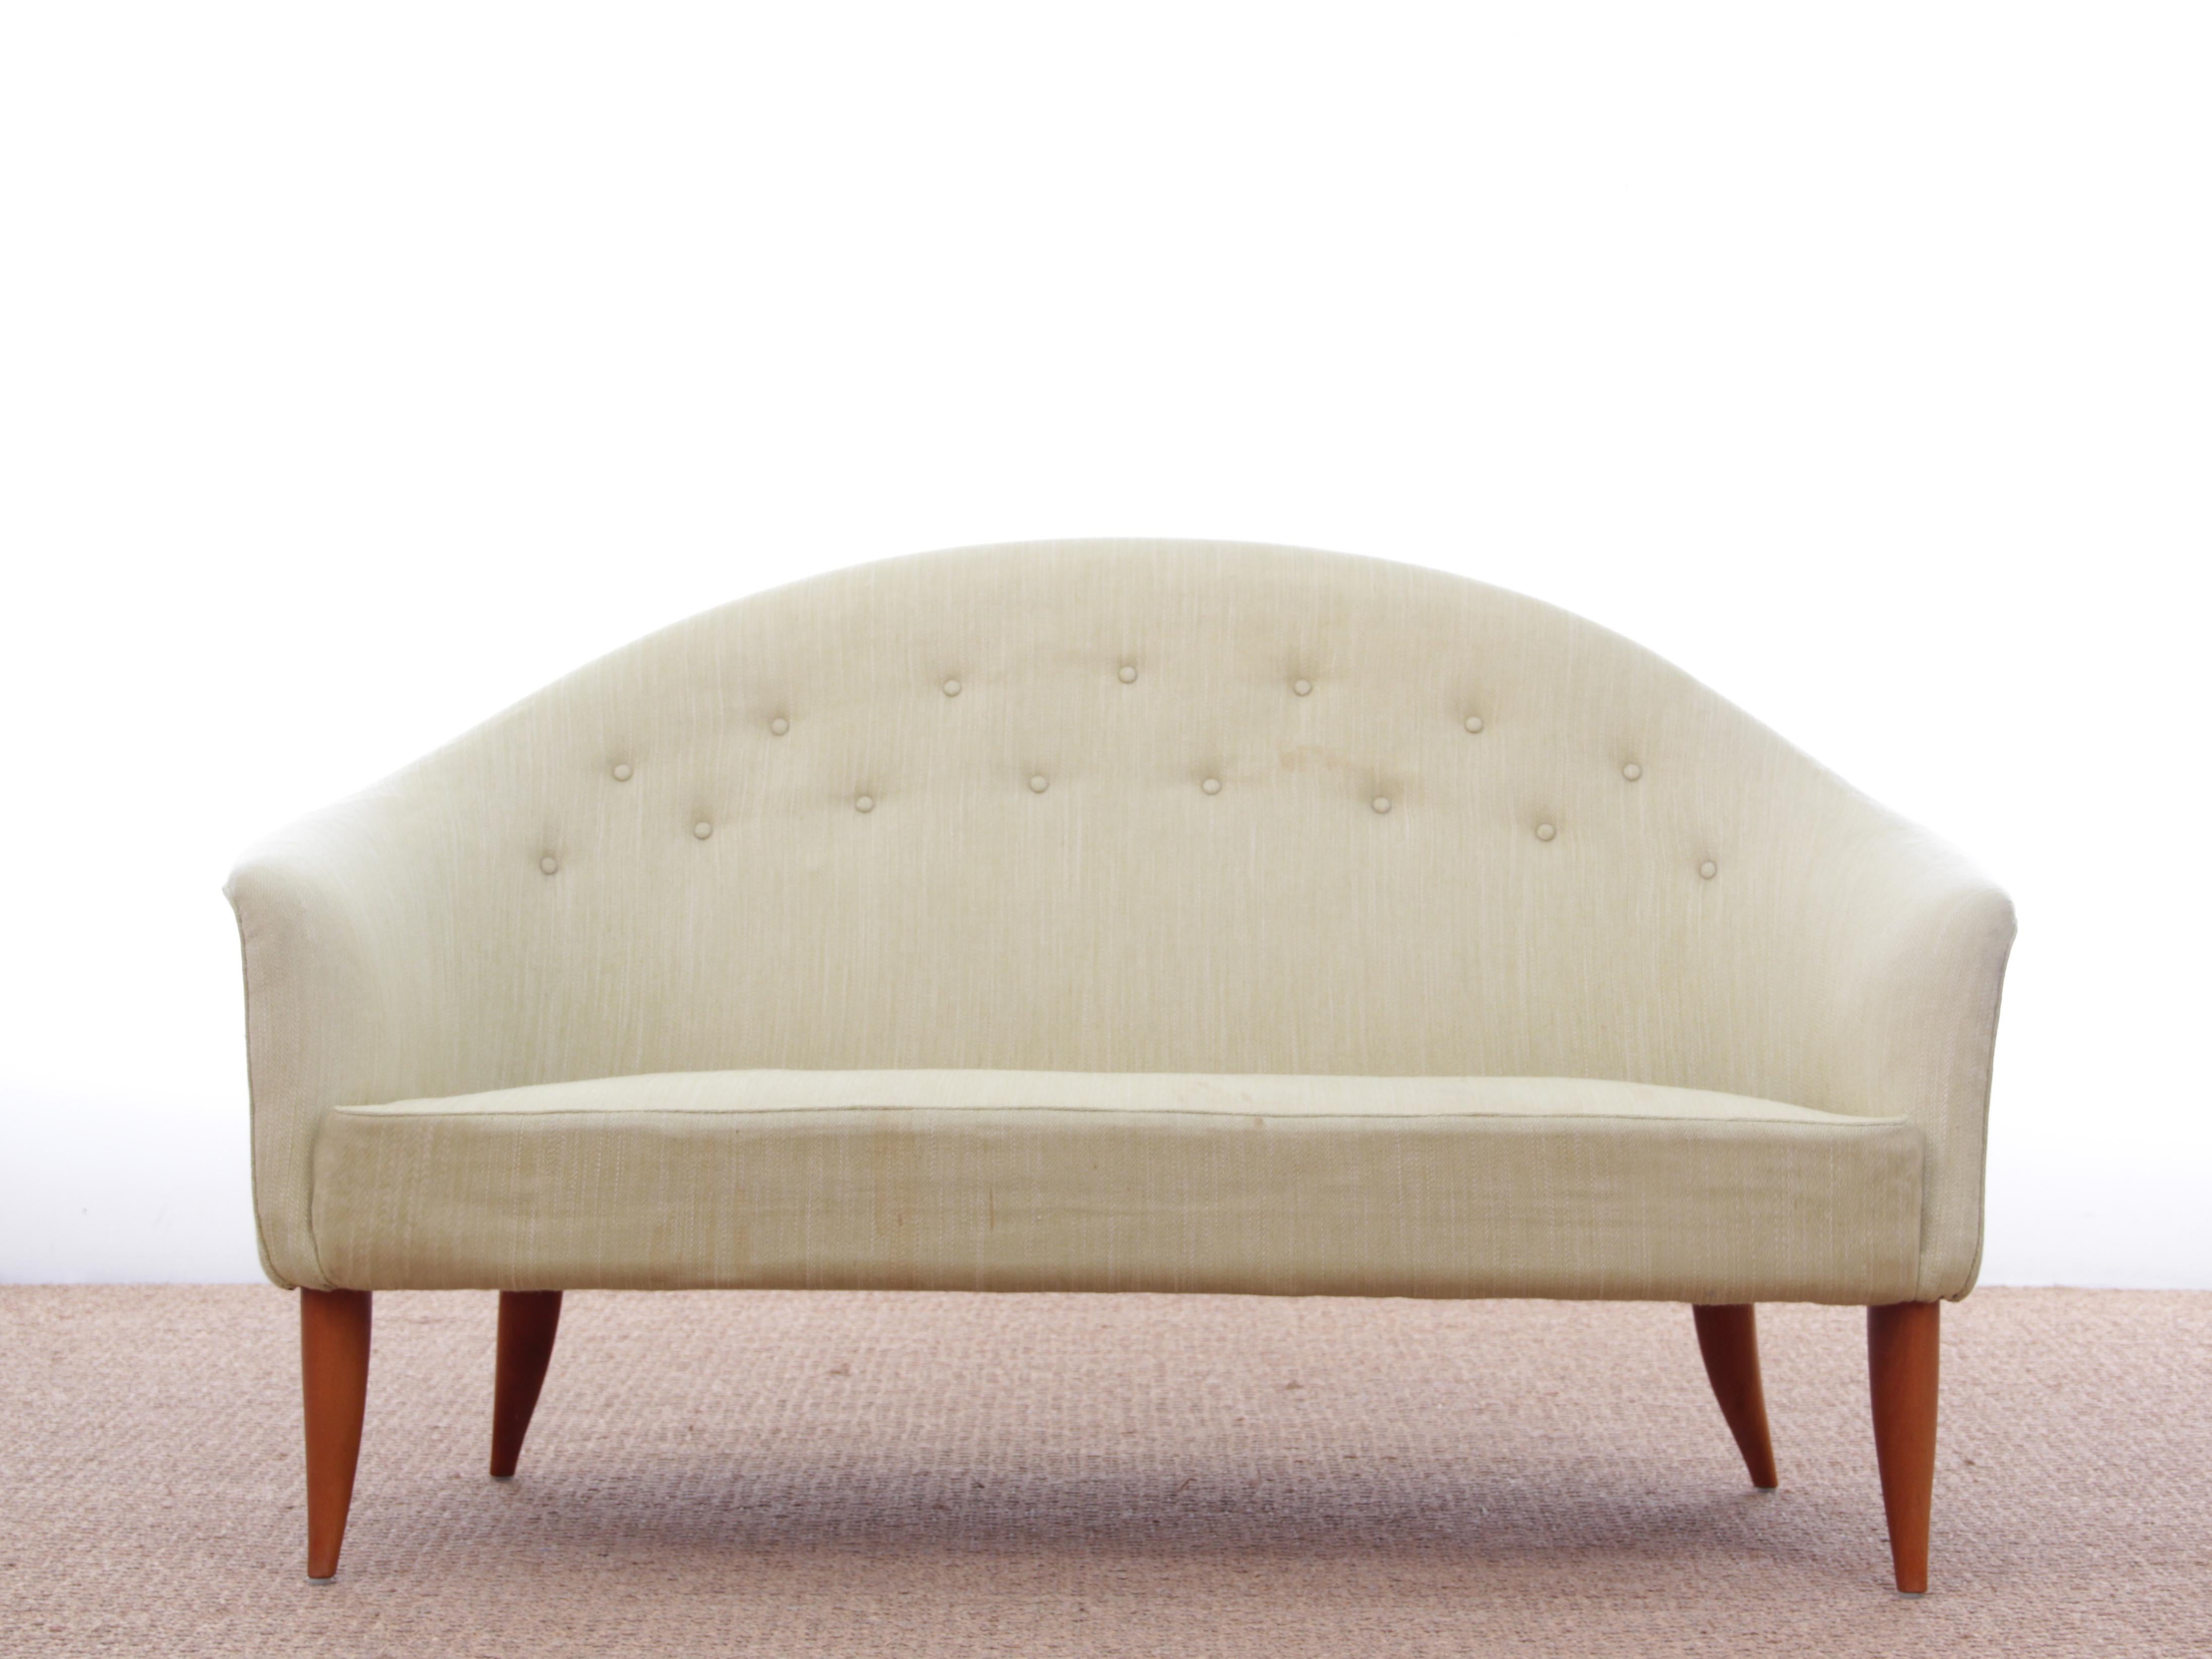 Mid-Century Modern Scandinavian sofa 2-seat in style of Carl Malmsten. Will be re-upholstered with the fabric of your choice between Step Melange fabric collection.